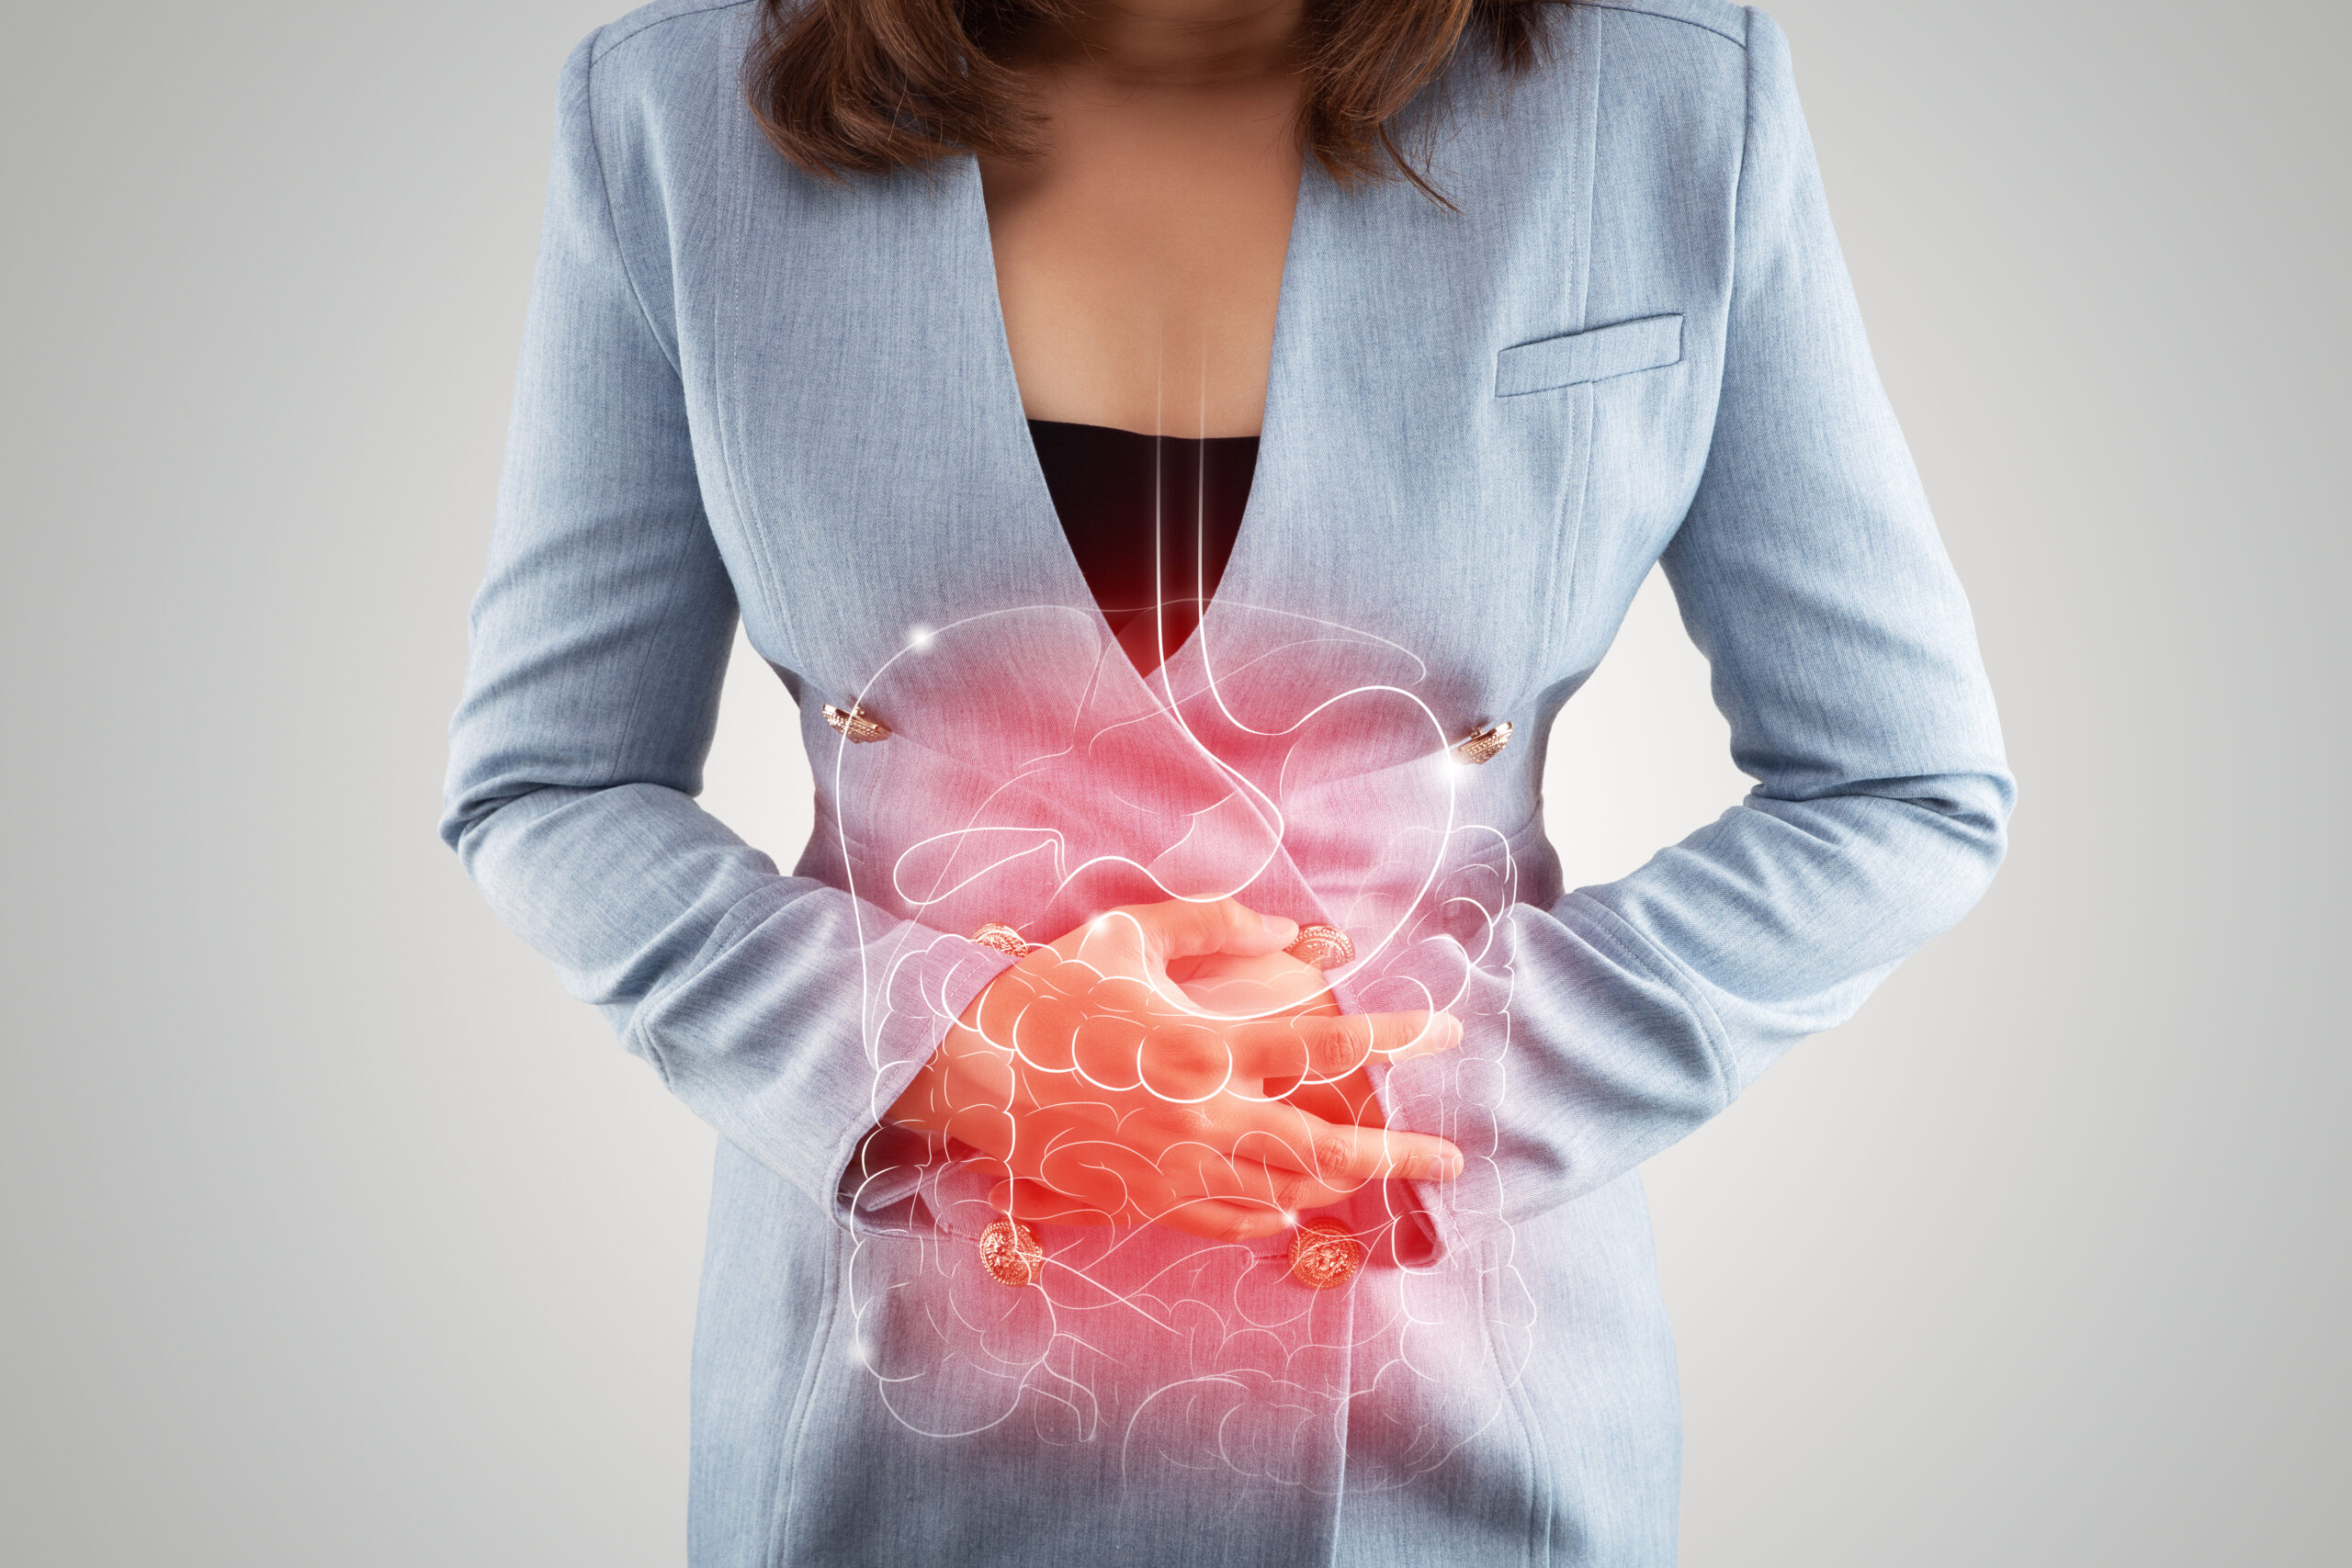 Use the Rooibos to calm gastrointestinal pains - Clinic DDG